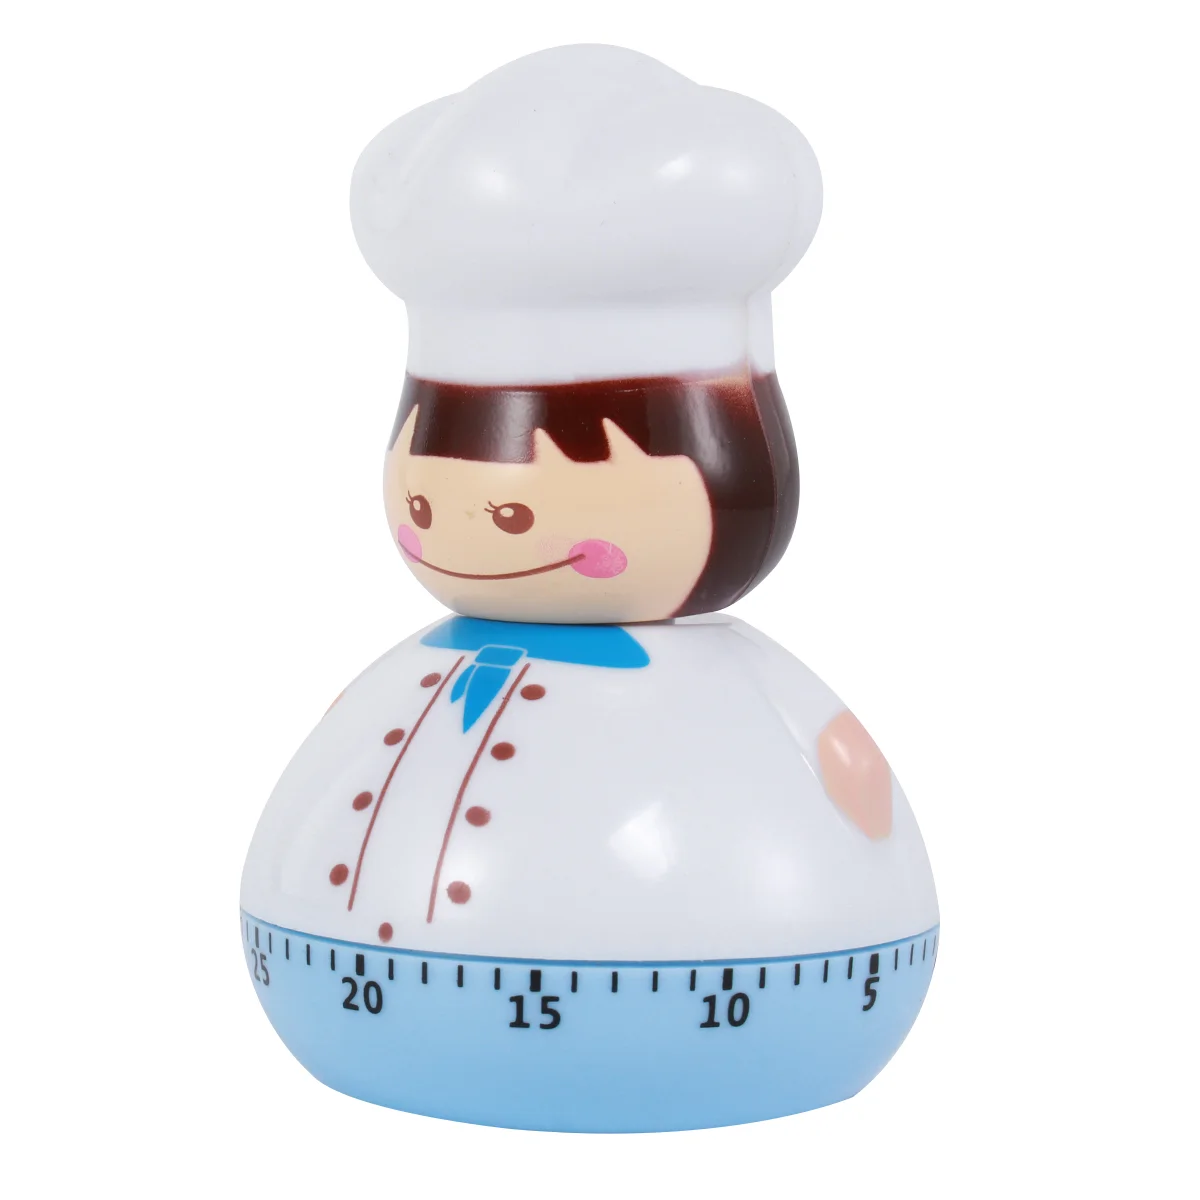 

Kitchen Timer Cooking Timer Cute Chef Timers 60 Minutes Countdown Timer Mechanical Timer Loud Alarm Clock Cooking Baking Facial